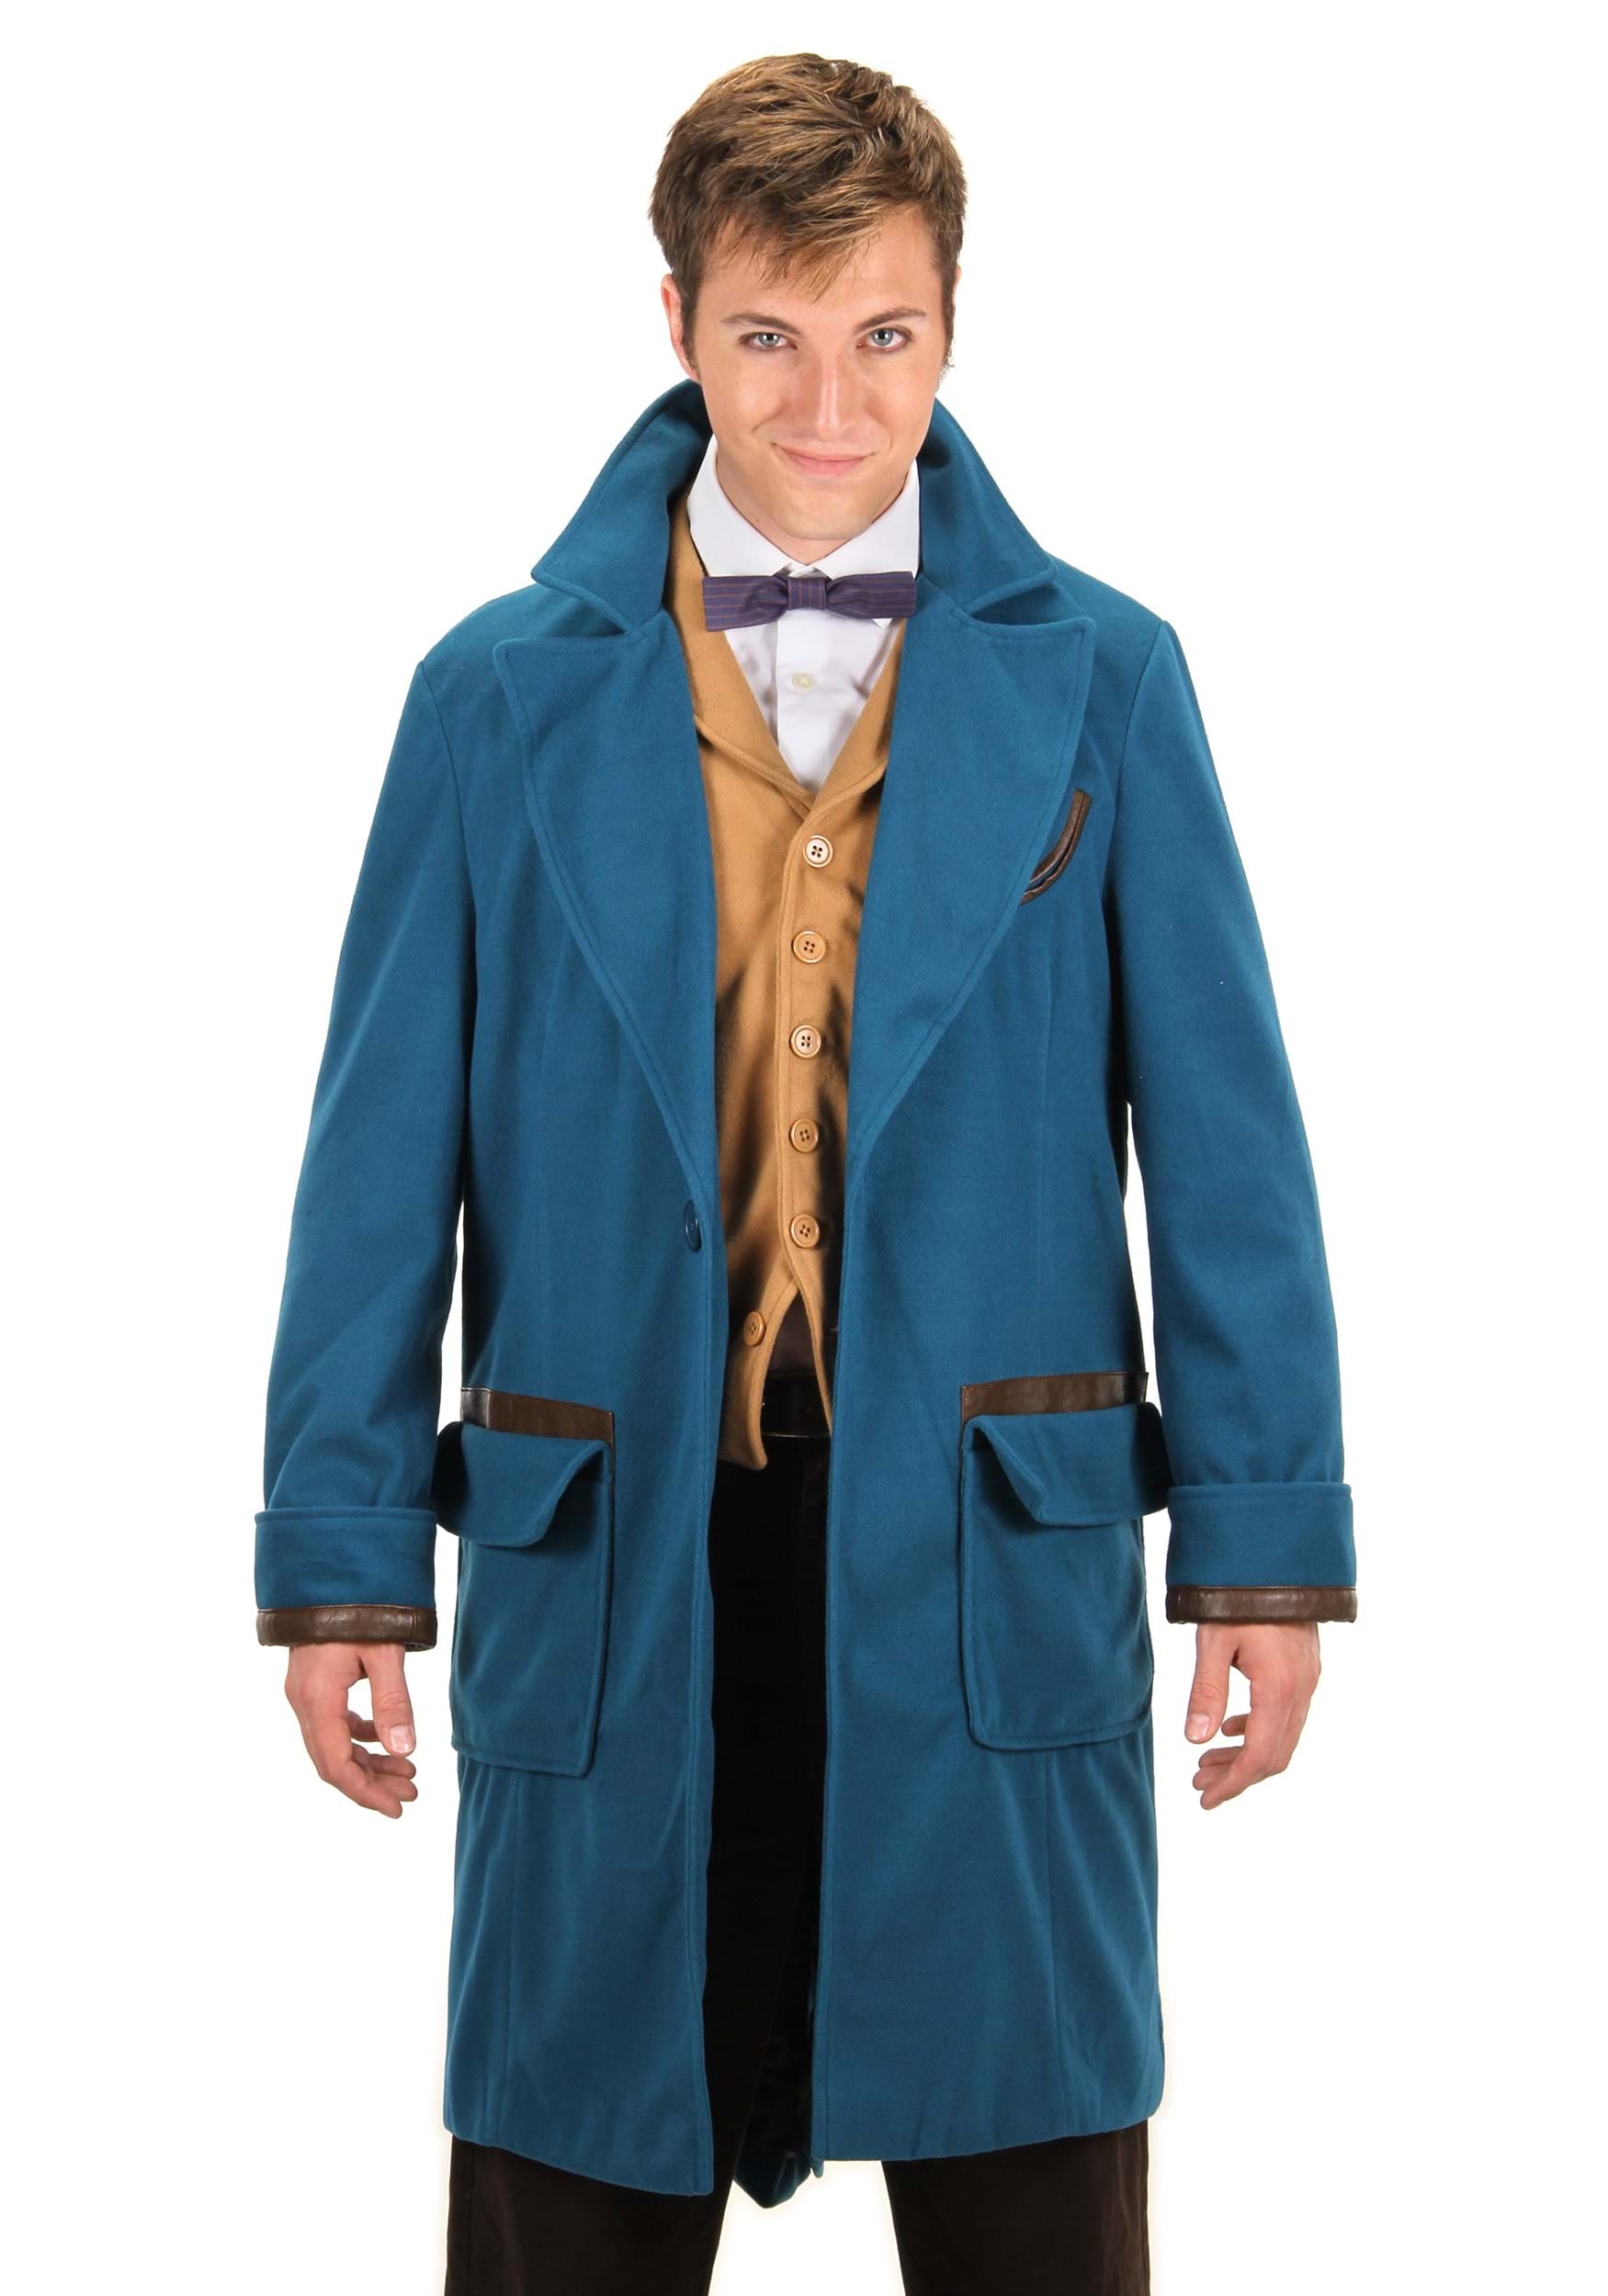 Newt Scamander Coat Fancy Dress Costume Fantastic Beasts And Where To Find Them